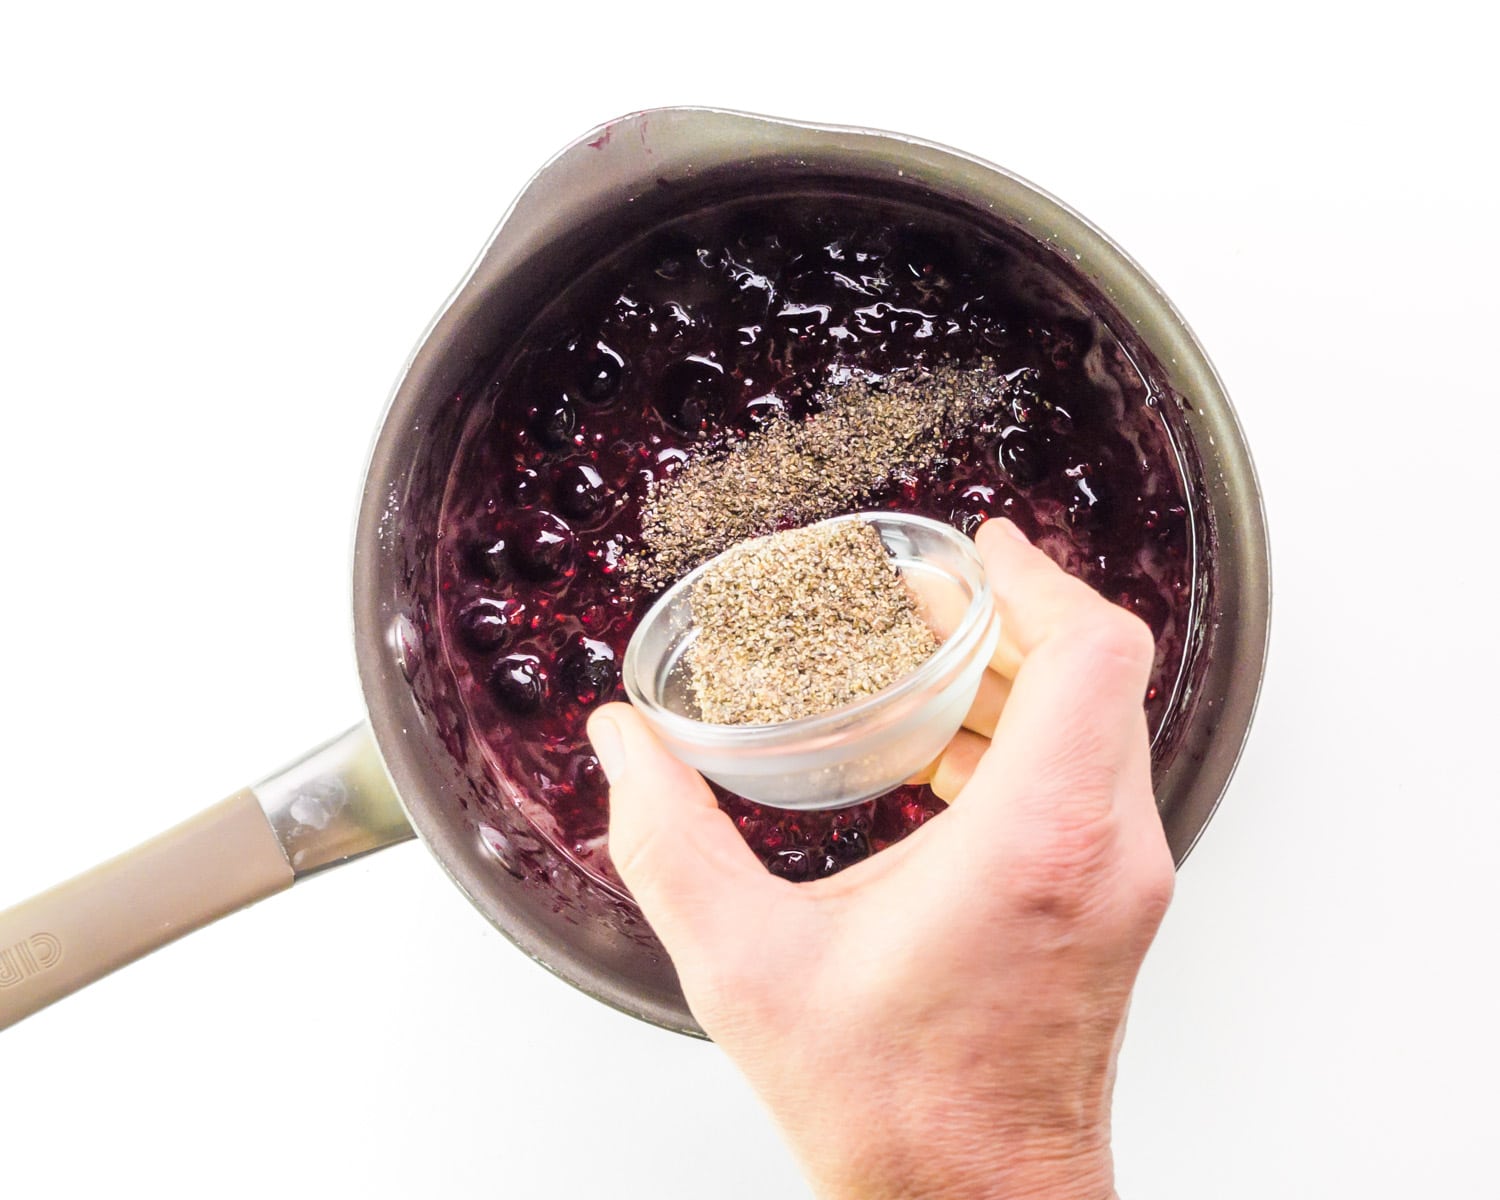 Ground chia seeds being poured into a saucepan with a berry sauce.